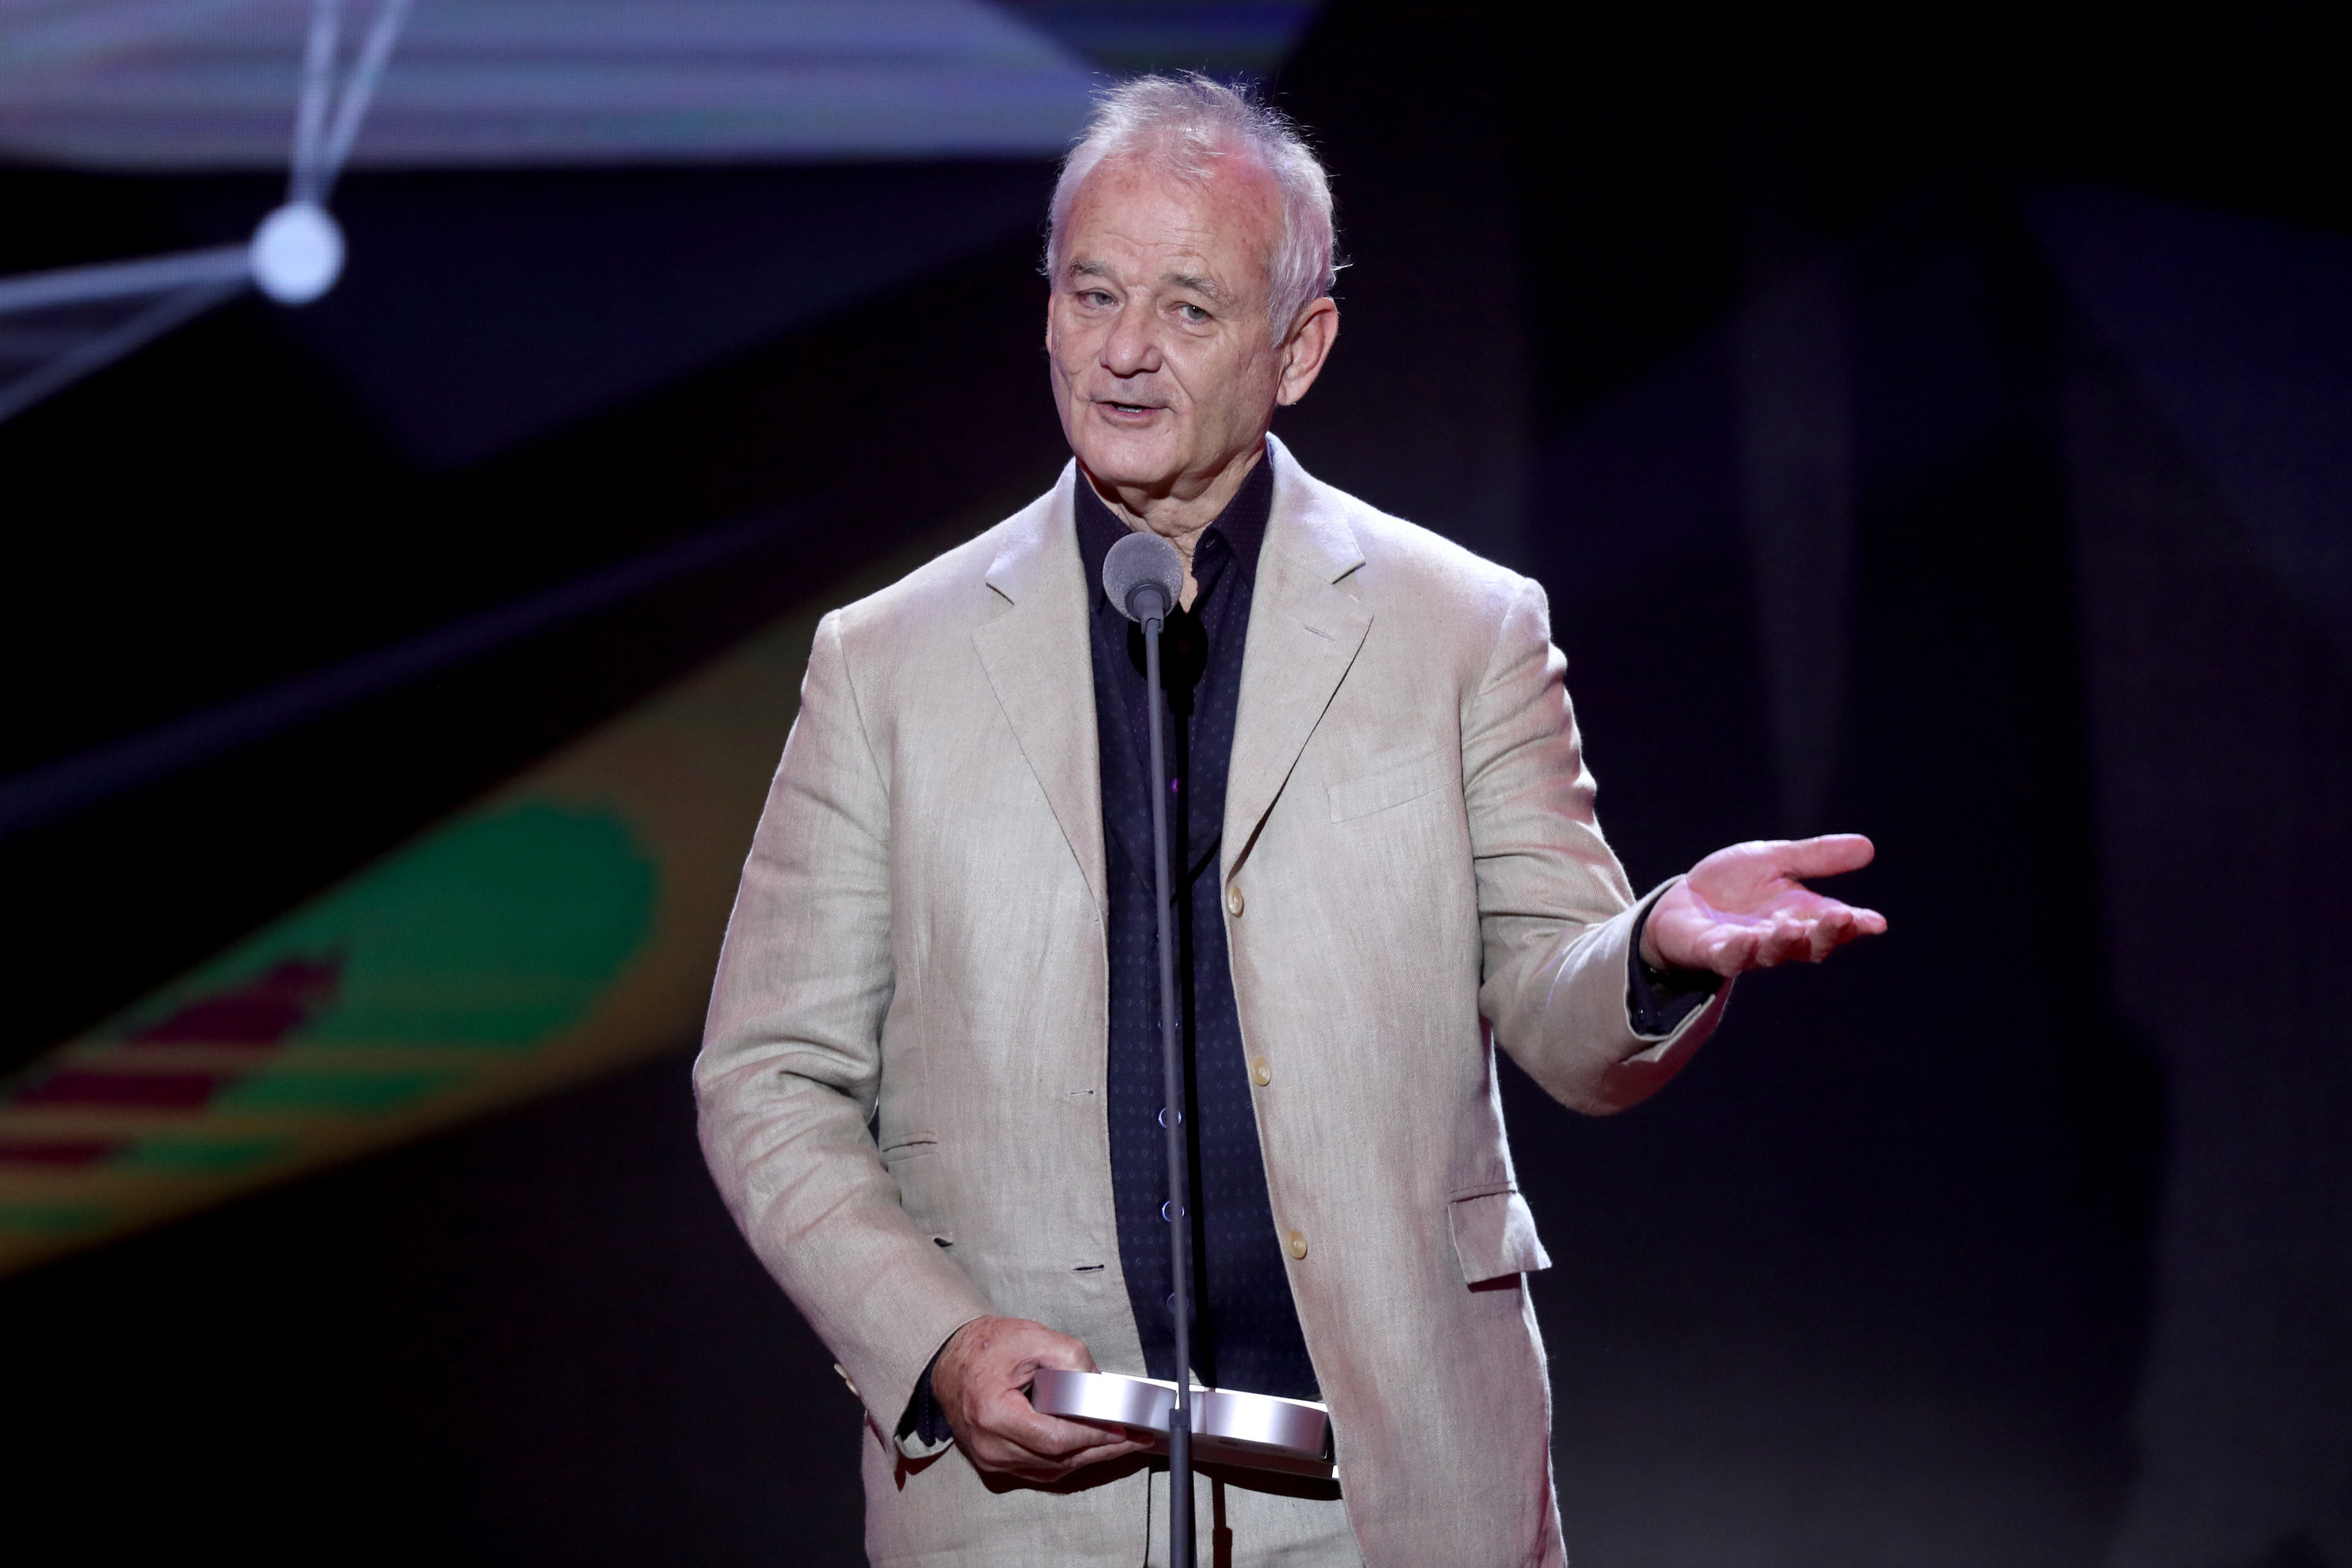 Bill Murray on stage speaking into a microphone